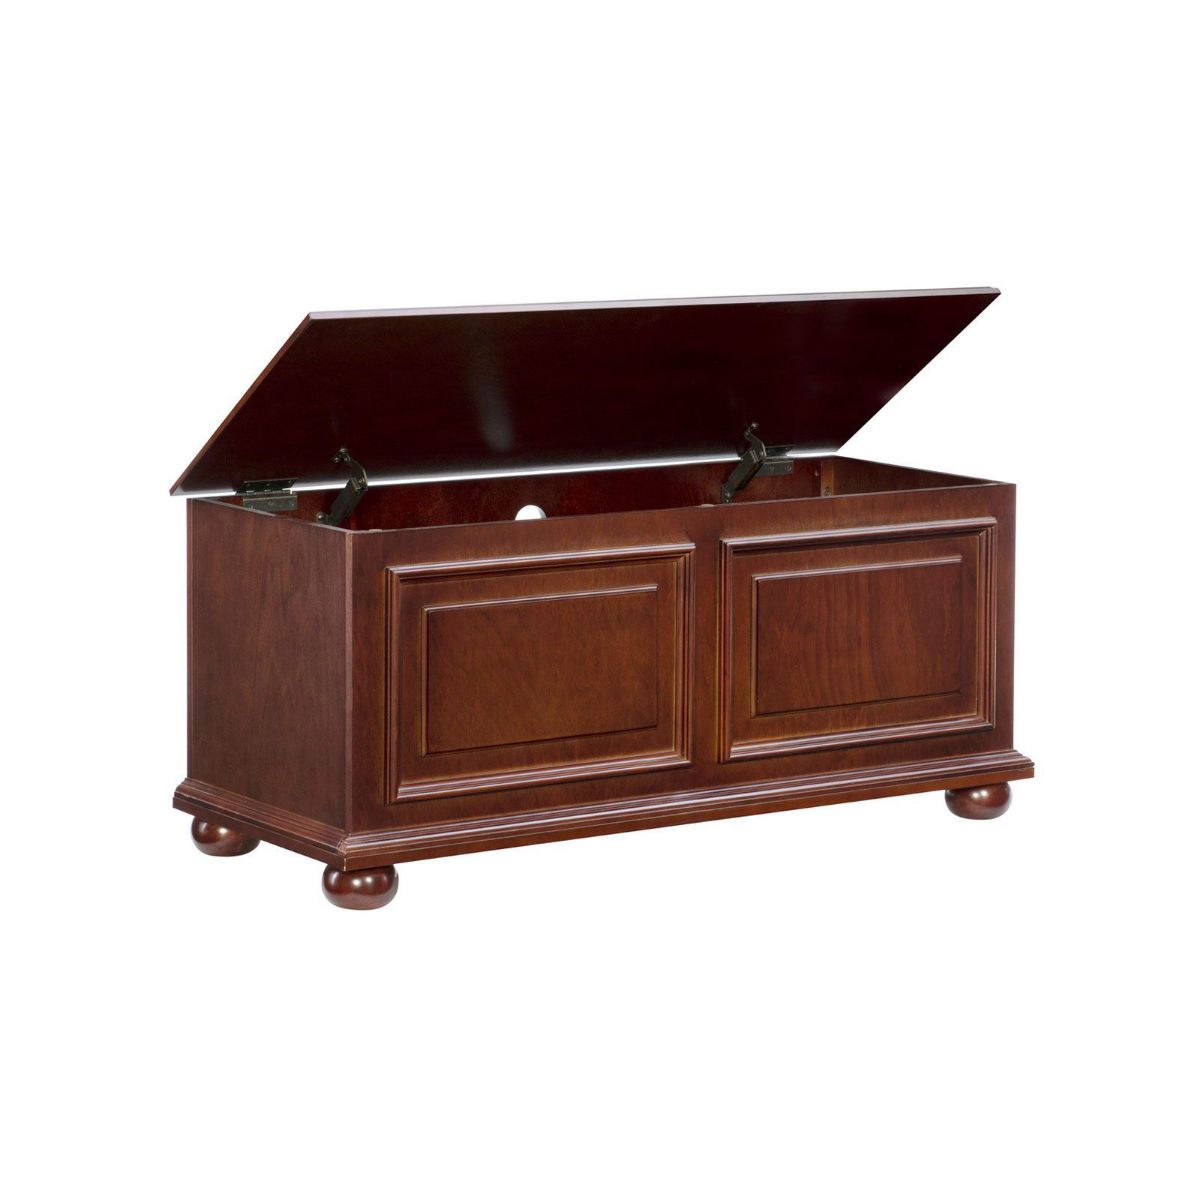 Picture of Chadwick Cherry Cedar Chest